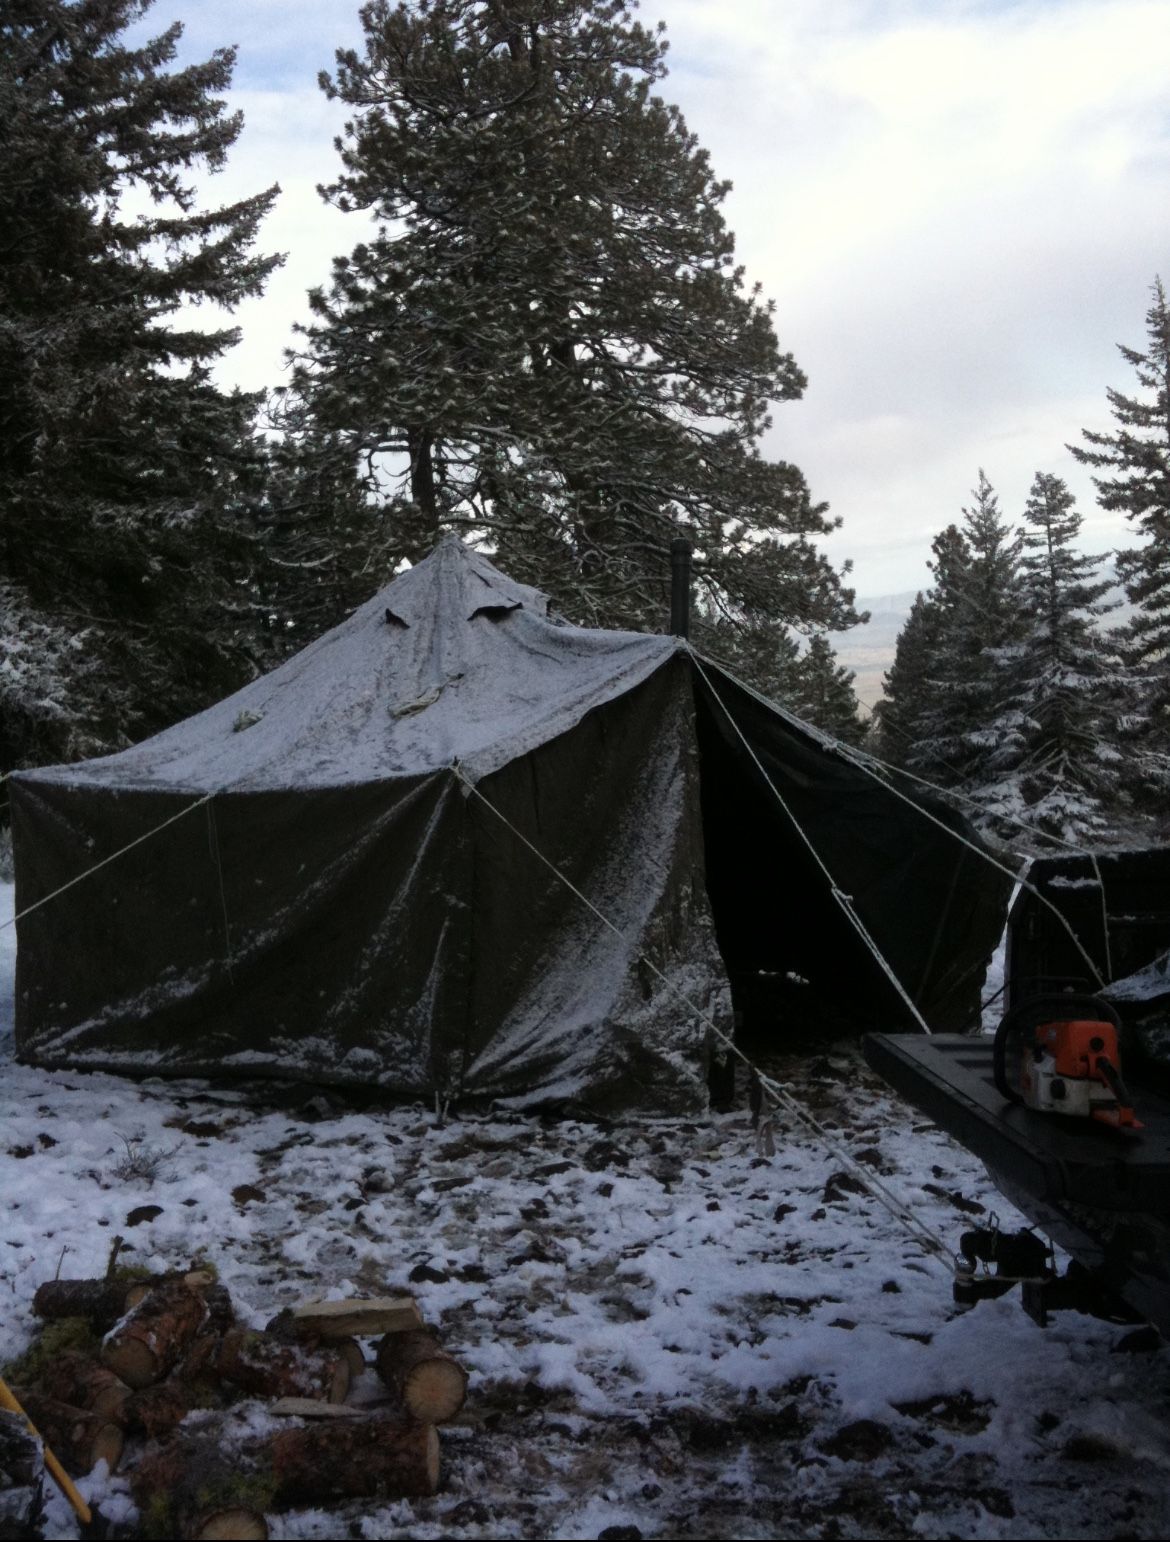 Canvas Military (Tent GP Small) for Sale in Gig Harbor, WA - OfferUp